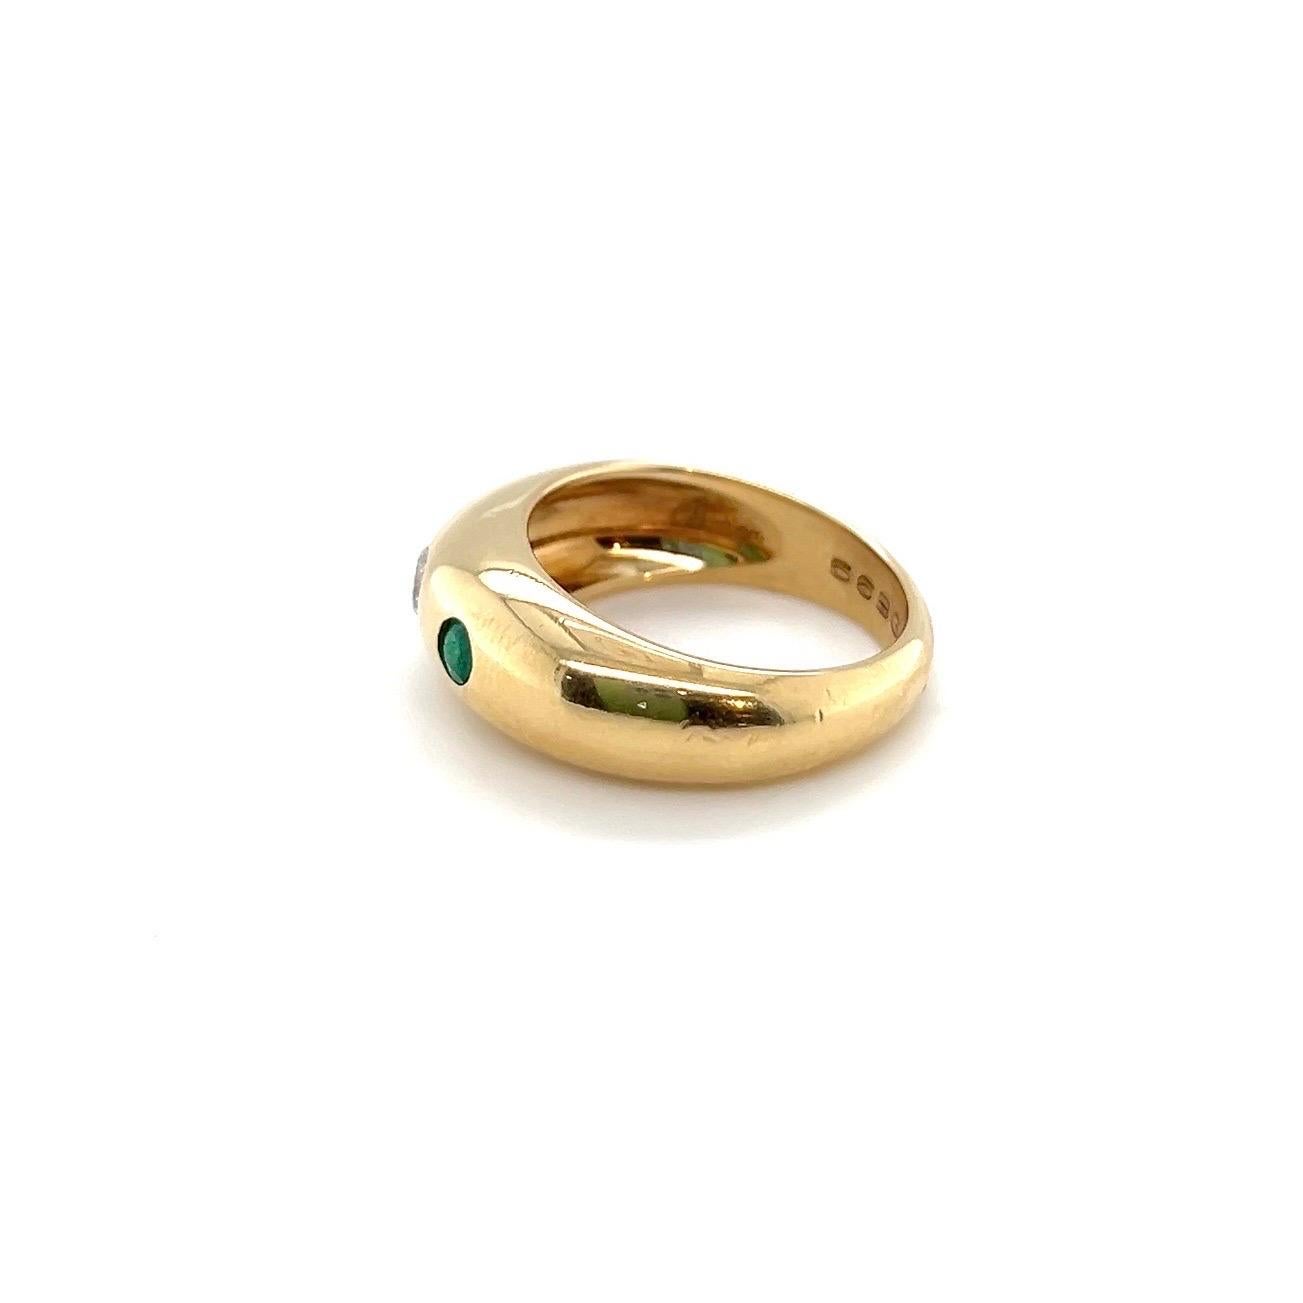 Round Cut 18 Karat Yellow Gold Diamond and Emerald Ring by Cartier